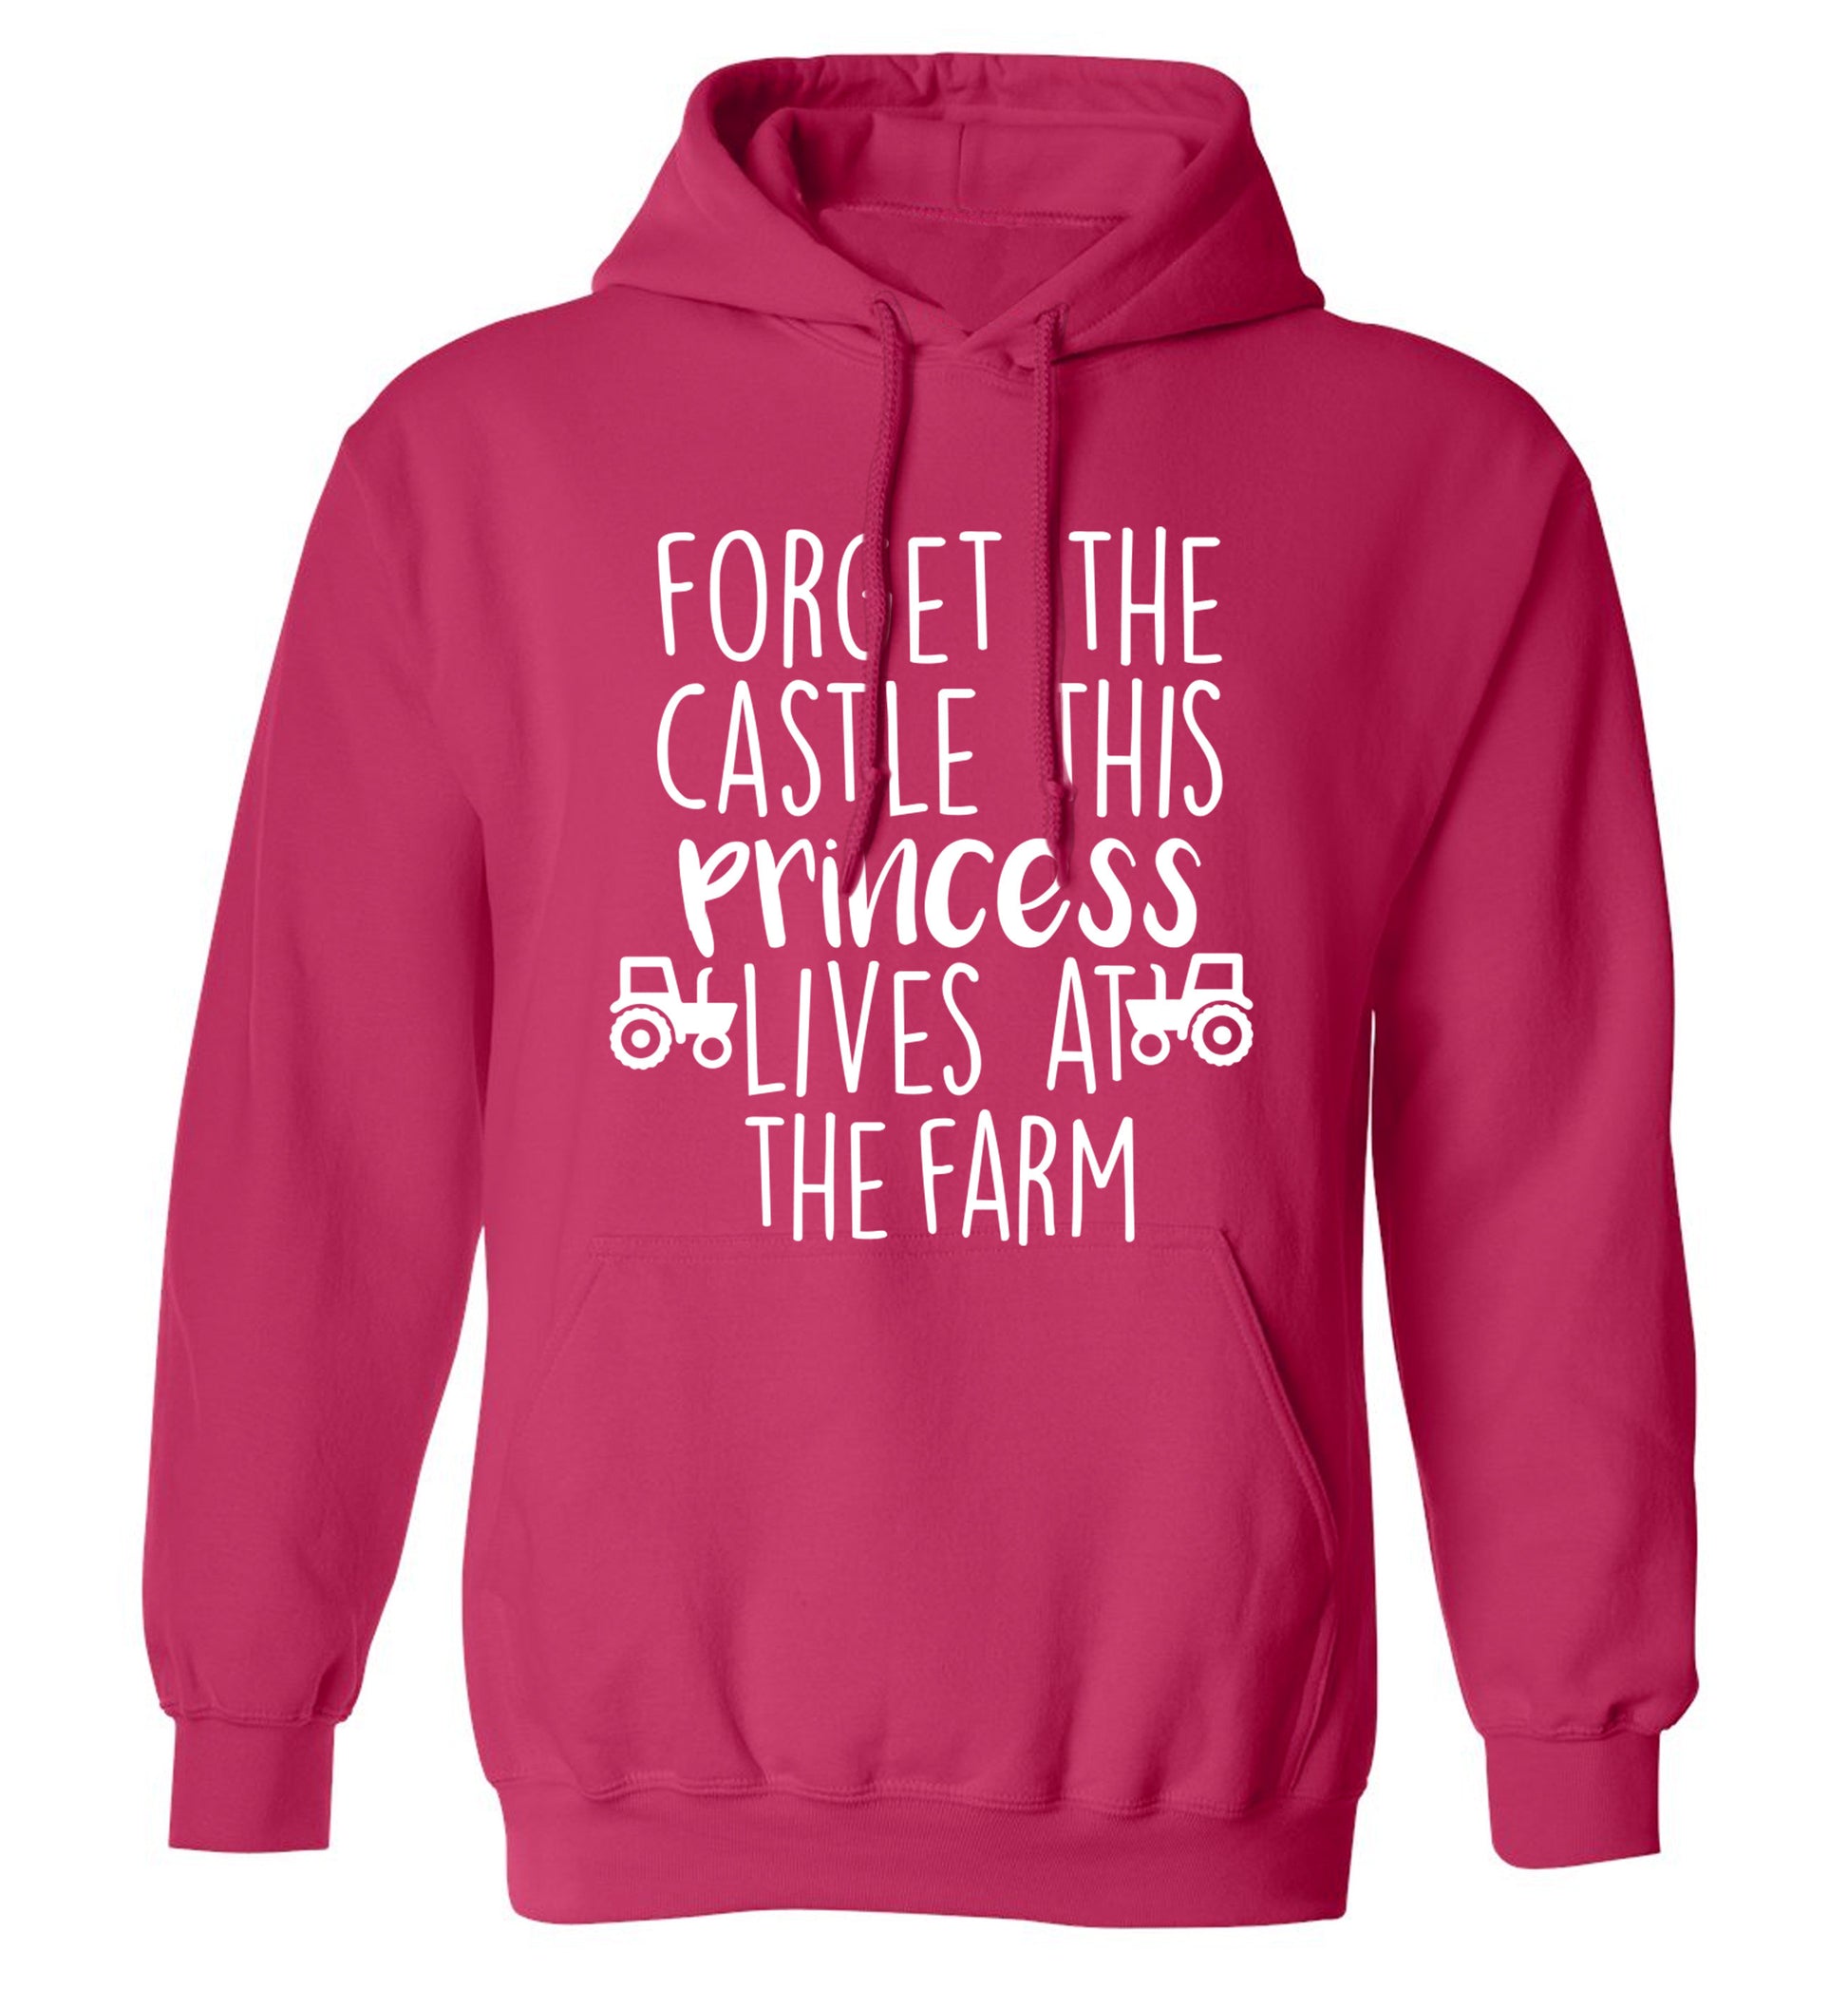 Forget the castle this princess lives at the farm adults unisex pink hoodie 2XL